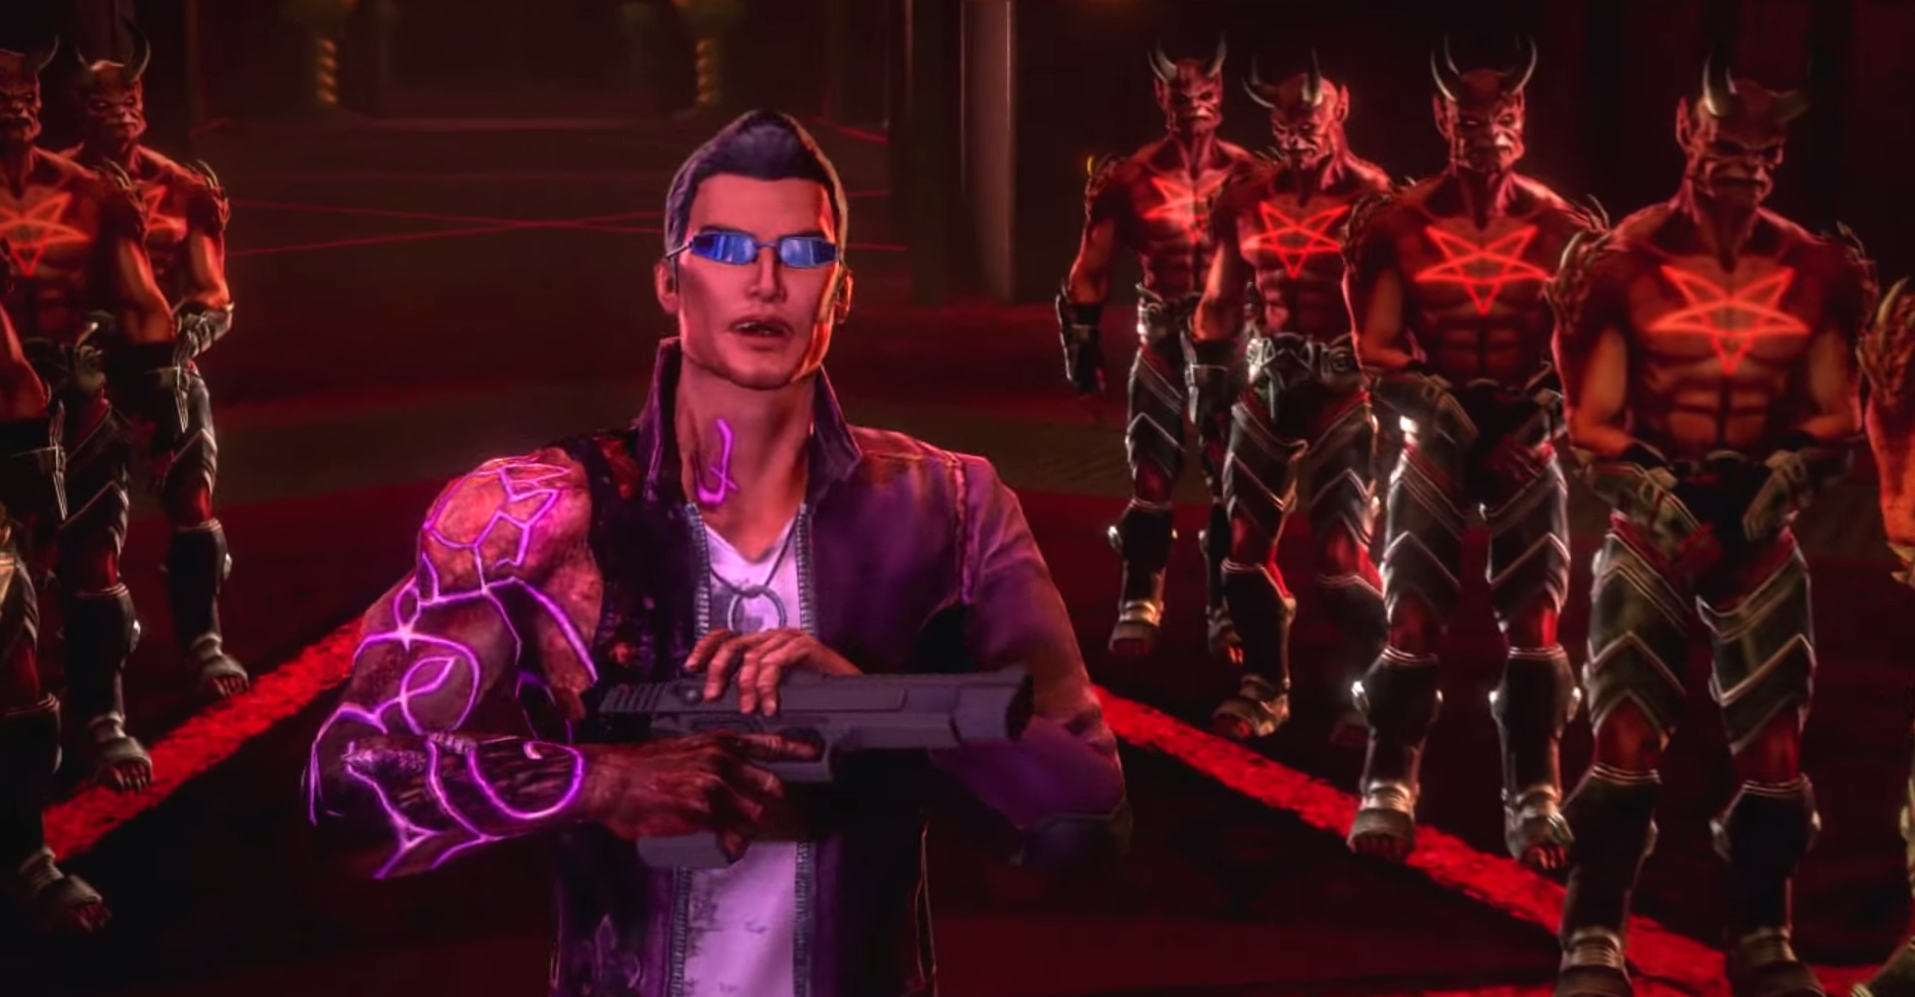 saints-row-gat-goes-to-hell-100411283-orig.png